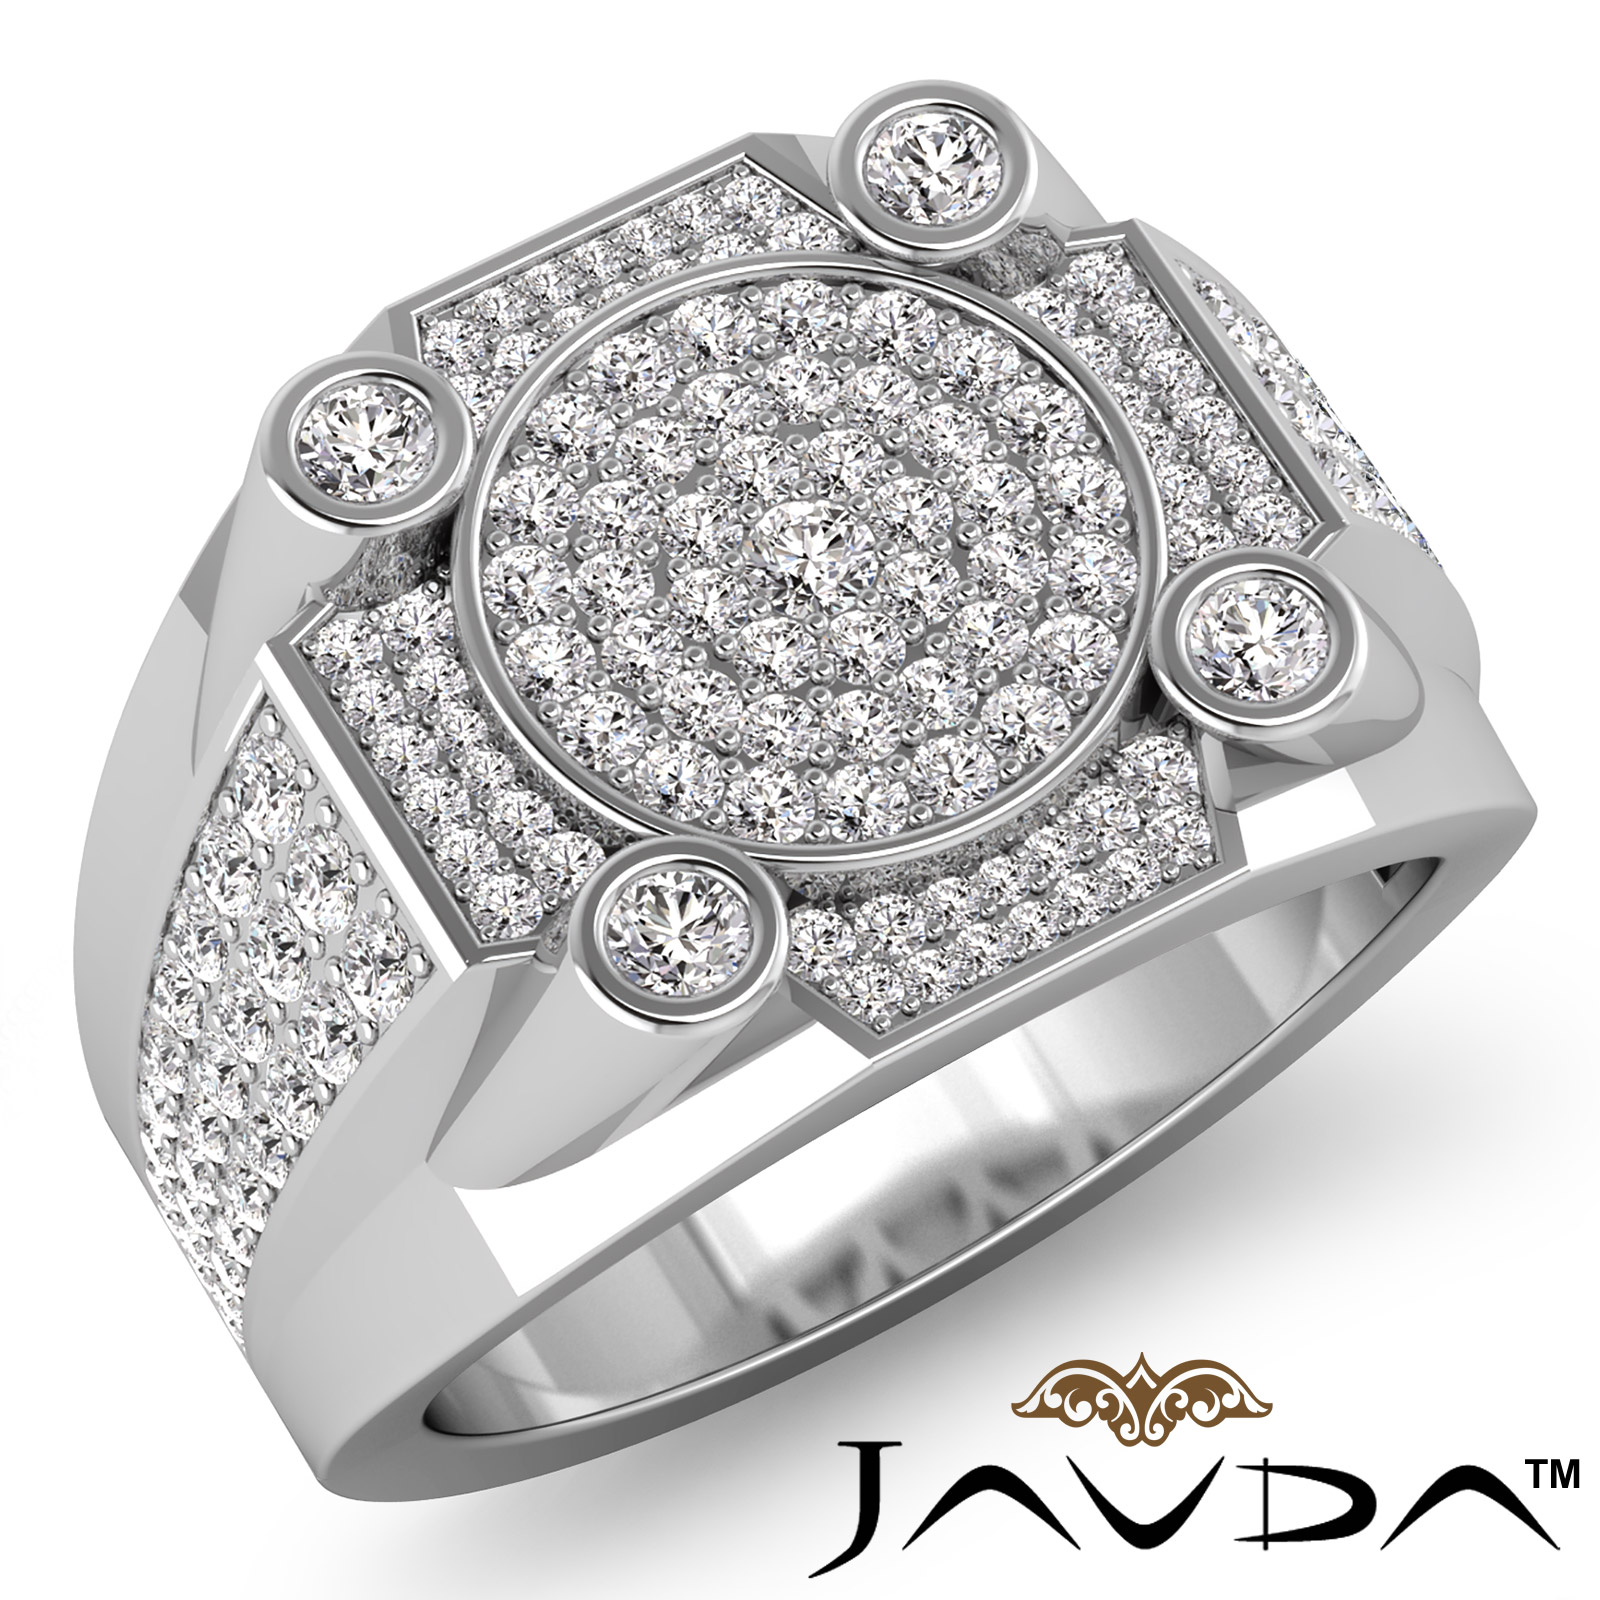 Men's 6ct Iced out Diamond Solitaire w Micro Pave setting Ring Solid 925  #2-02